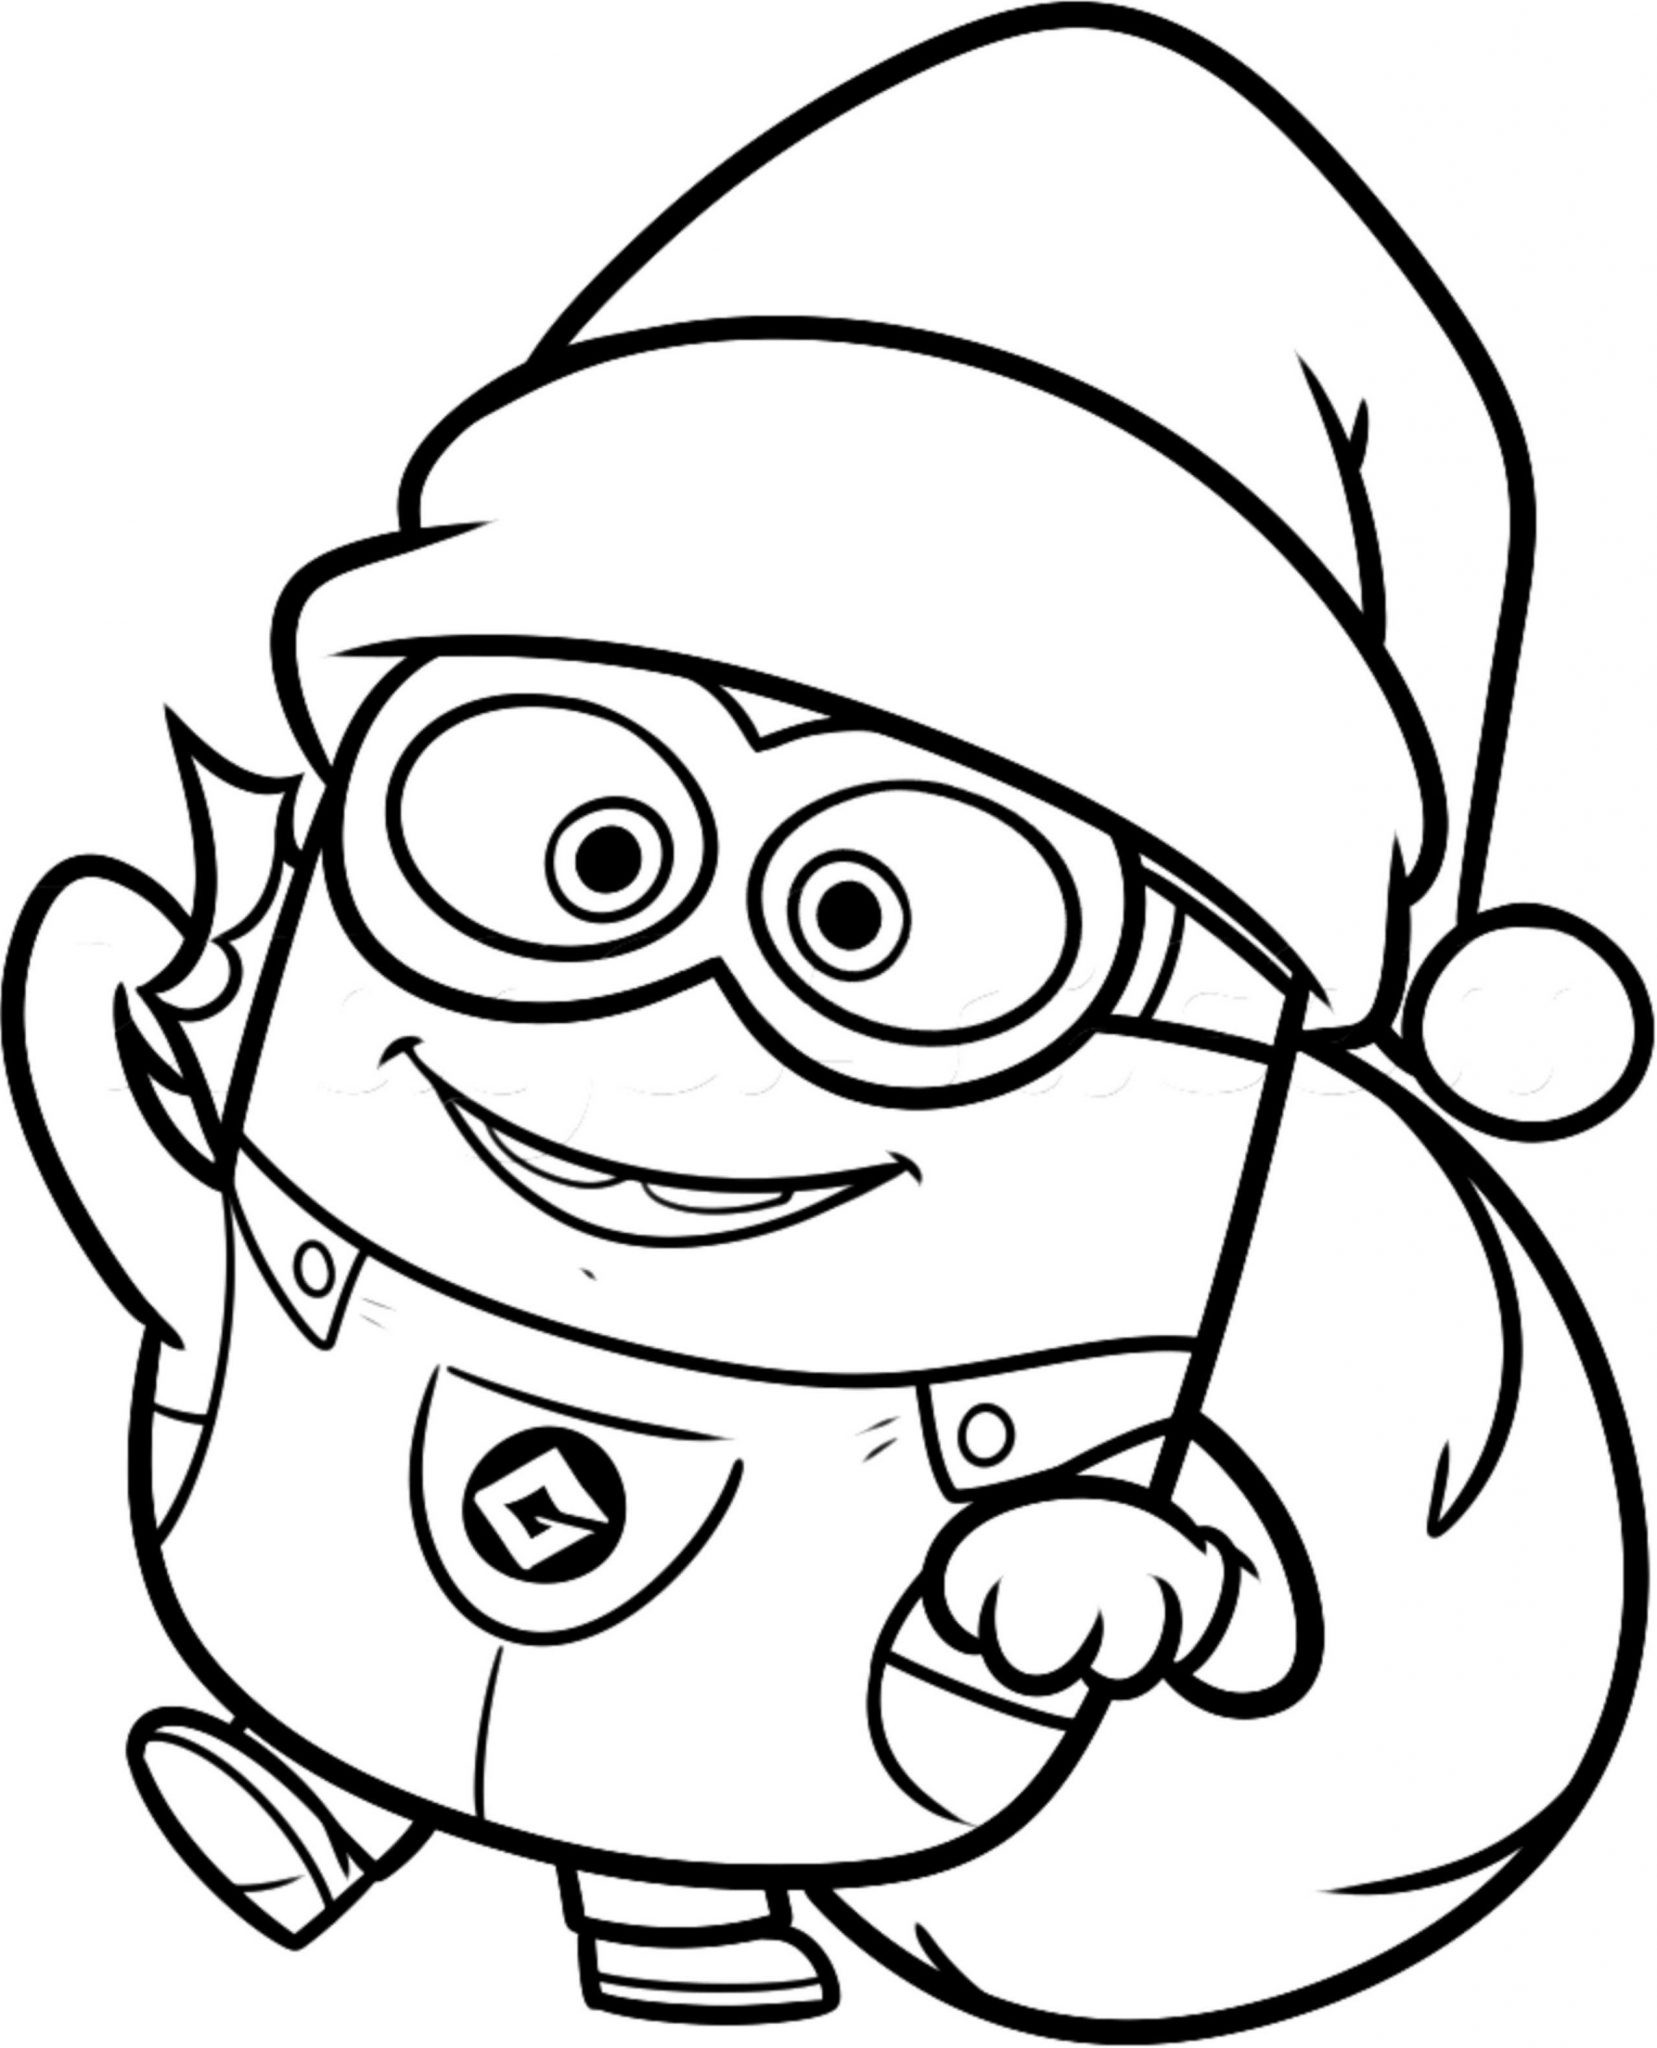 Minion Coloring Pages For Kids
 Print & Download Minion Coloring Pages for Kids to Have